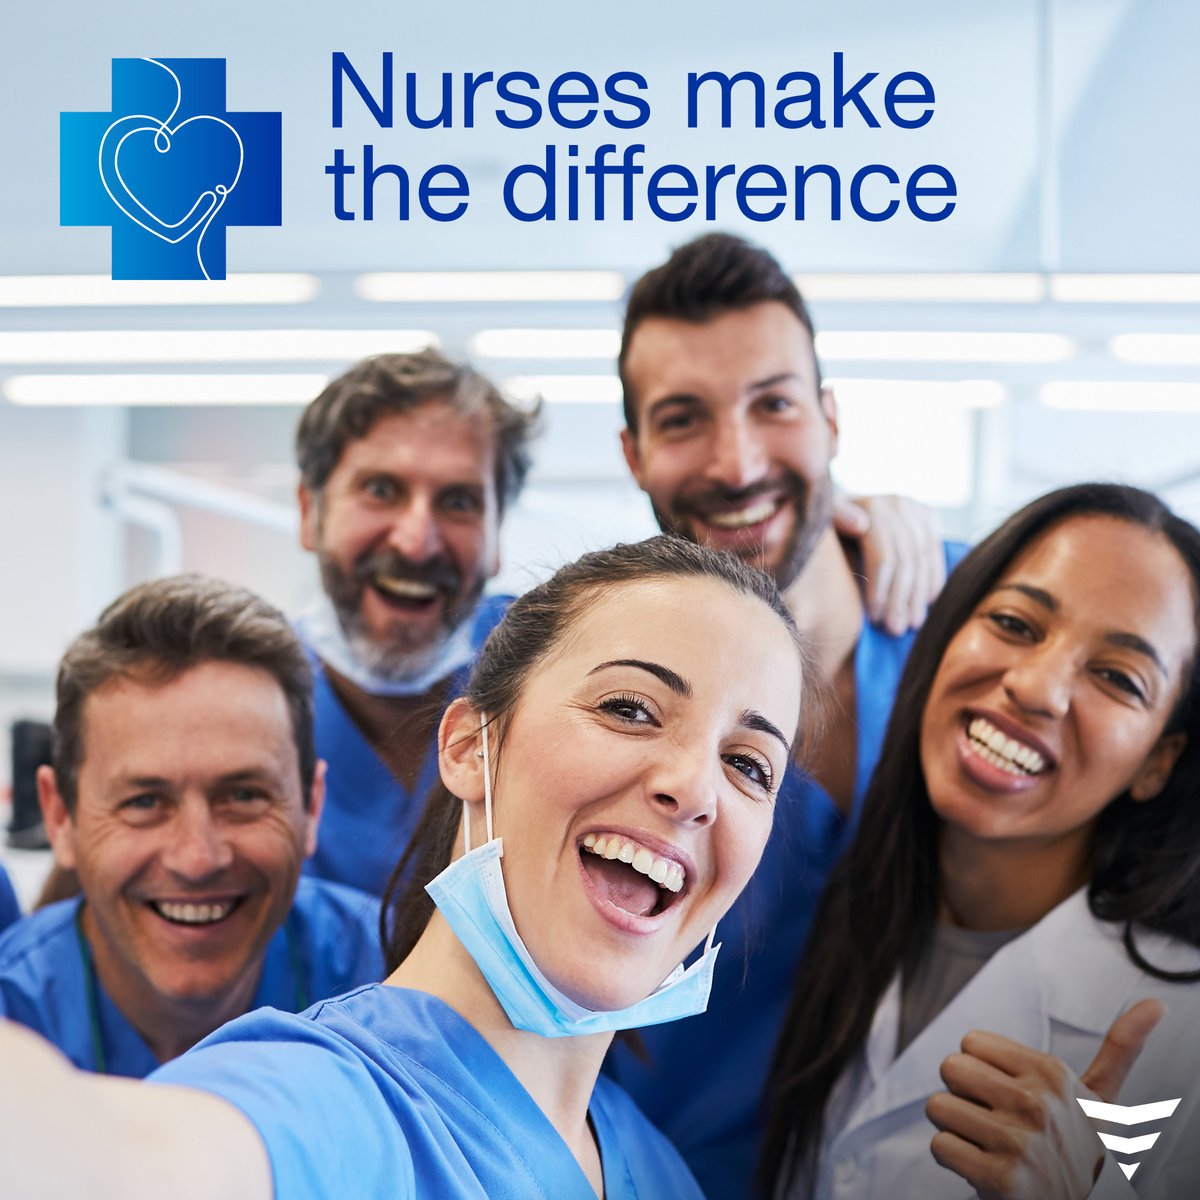 Kicking off our global #InternationalNursesDay celebrations 🎉 Grateful for our incredible nurses and care teams at Fresenius Medical Care. Your compassion, daily acts of kindness and dedication change lives. Everything you do makes the difference. Thank you! 🩺💙 #INDatFME